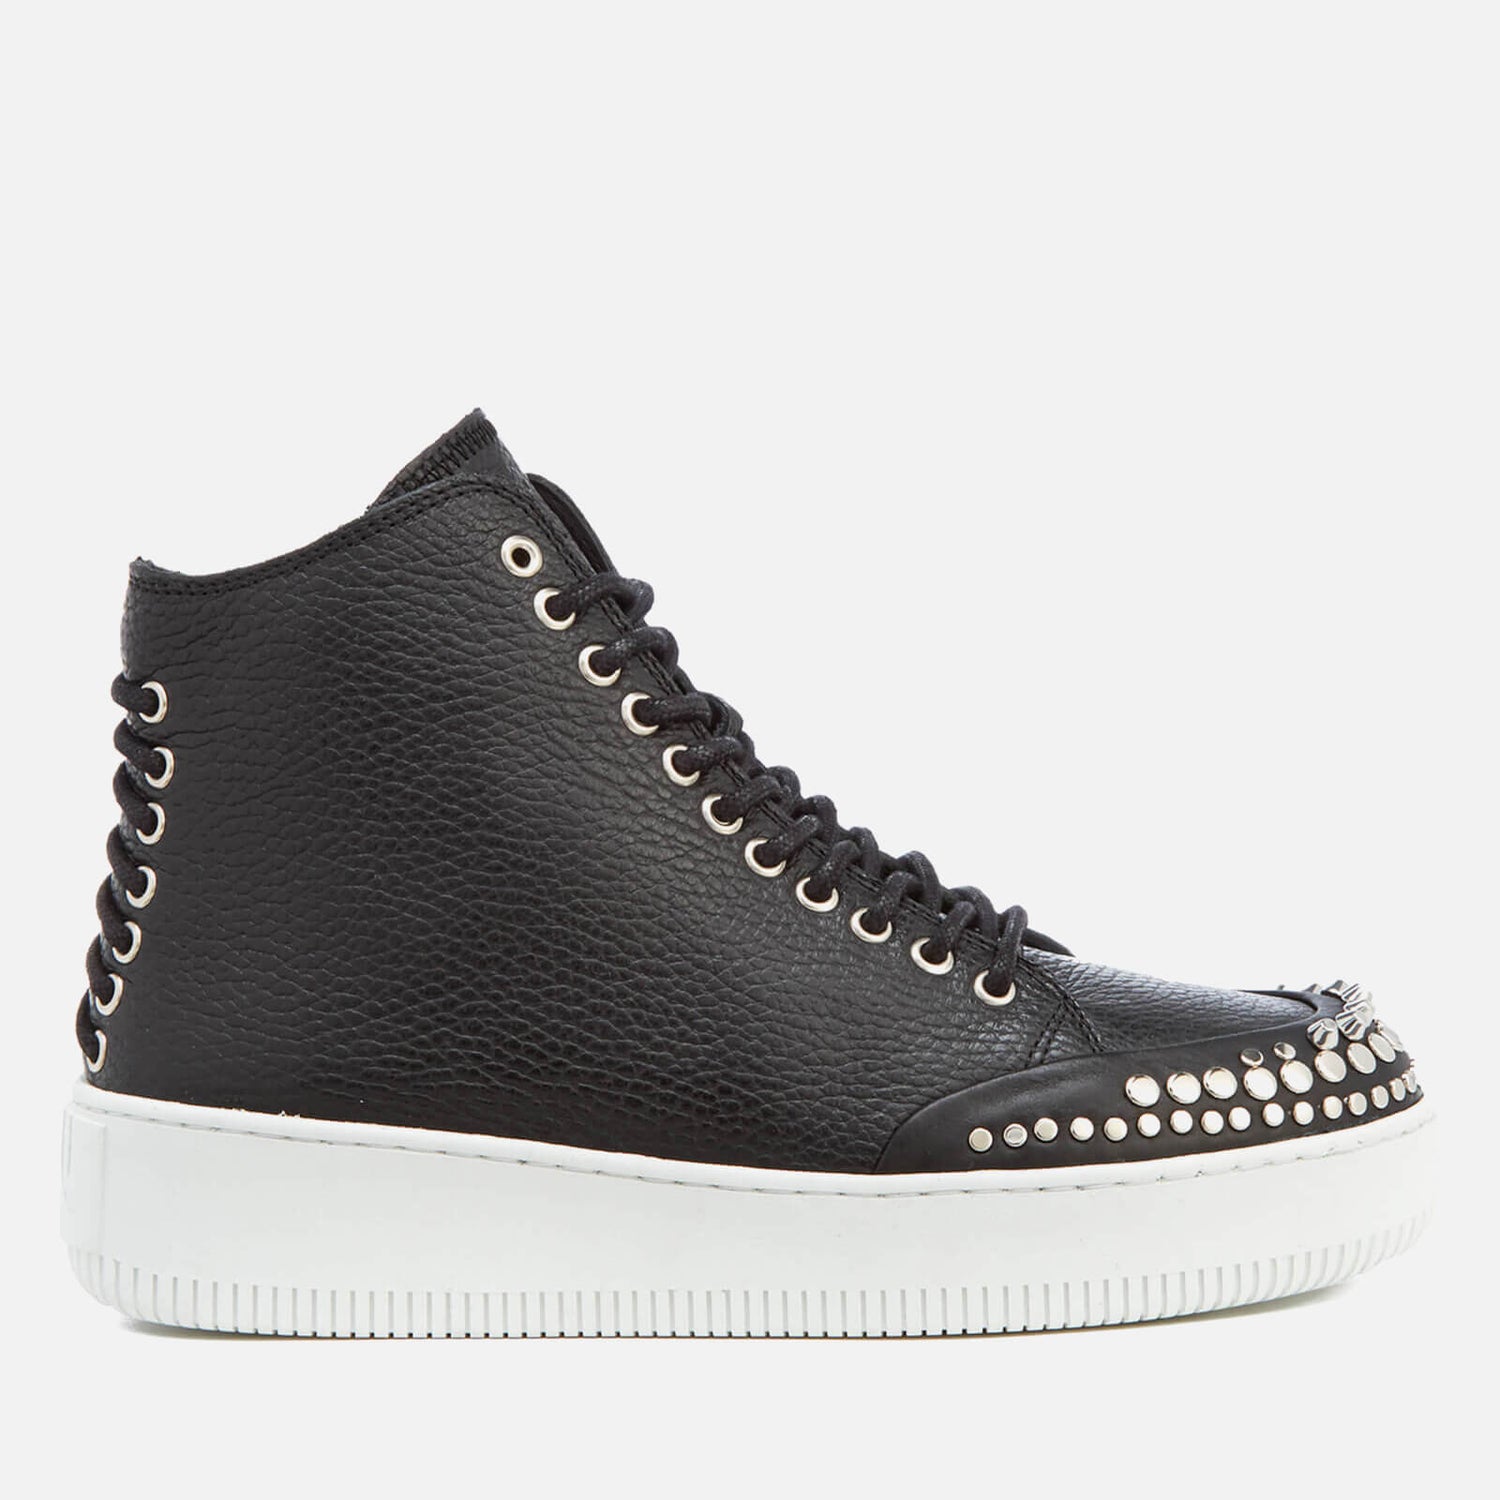 McQ Alexander McQueen Women's Netil Laced Eyelets Leather Hi-Top Trainers - Black